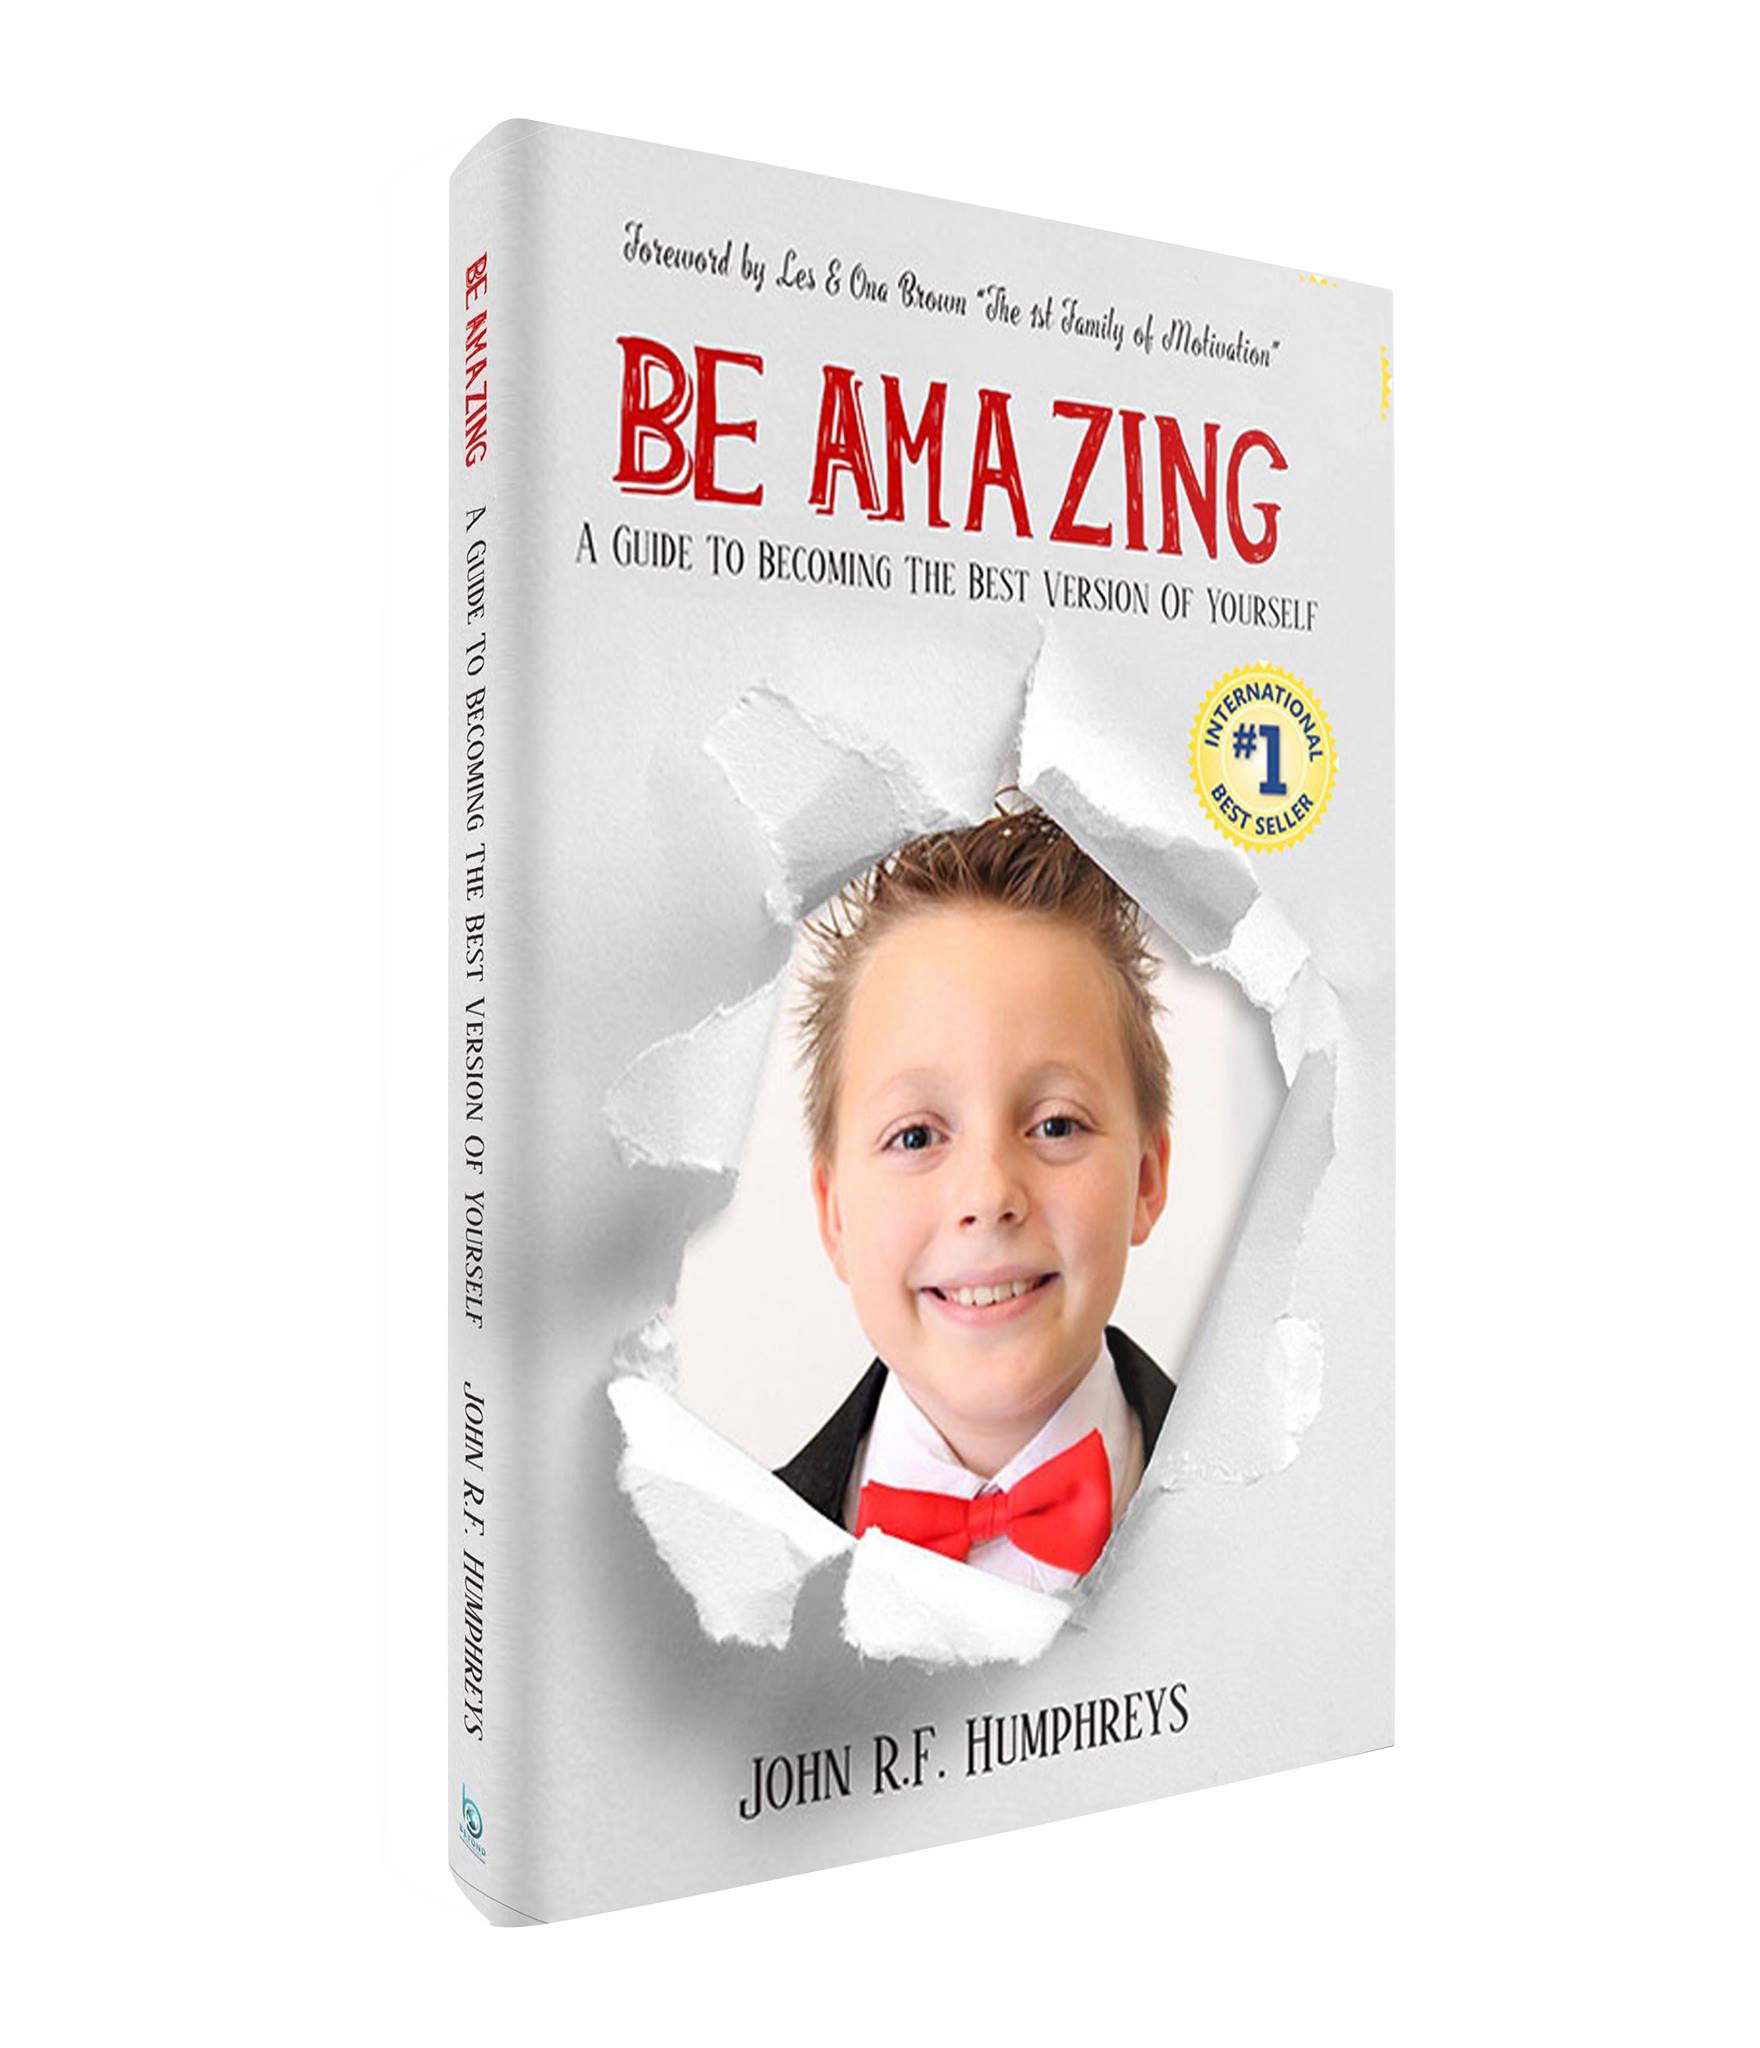 BE AMAZING the Book by The World's Youngest Motivational Speaker The Amazing John John. Published by Los Angeles Publisher Beyond Publishing Avail in hardcover 9781947256088 & softcover 9781947256095